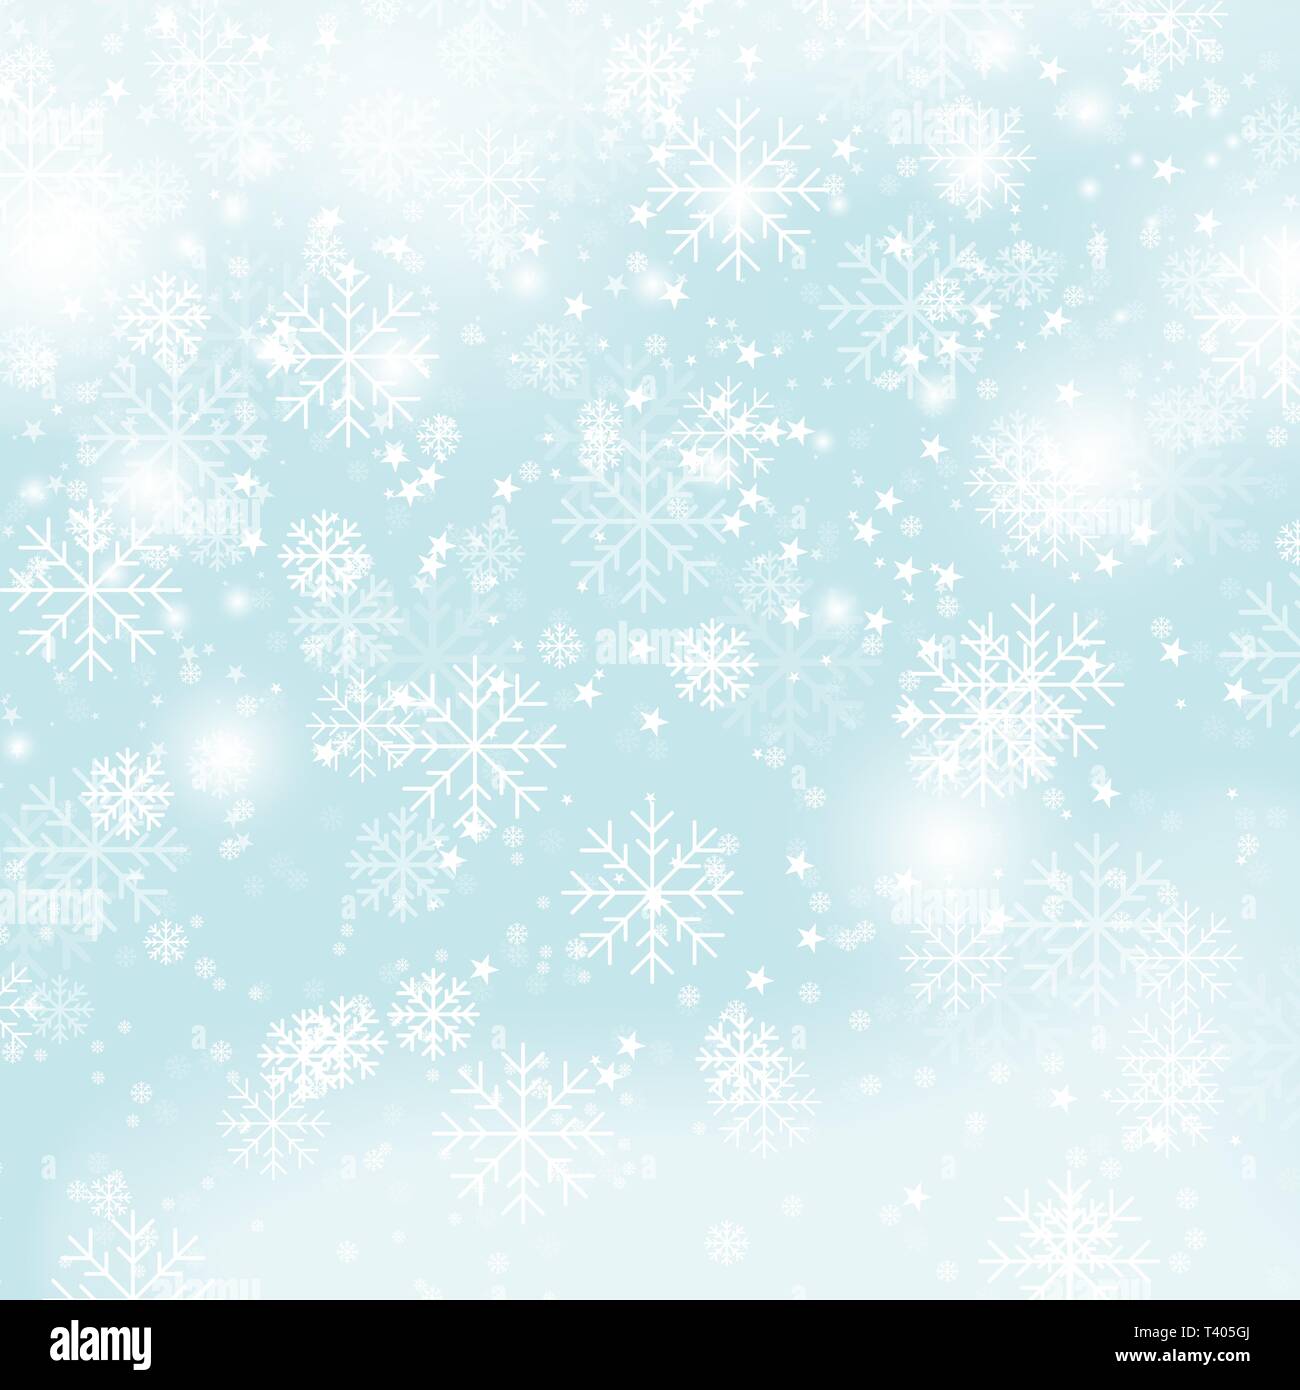 Seamless pattern of white snowflakes on red background. Snowfall